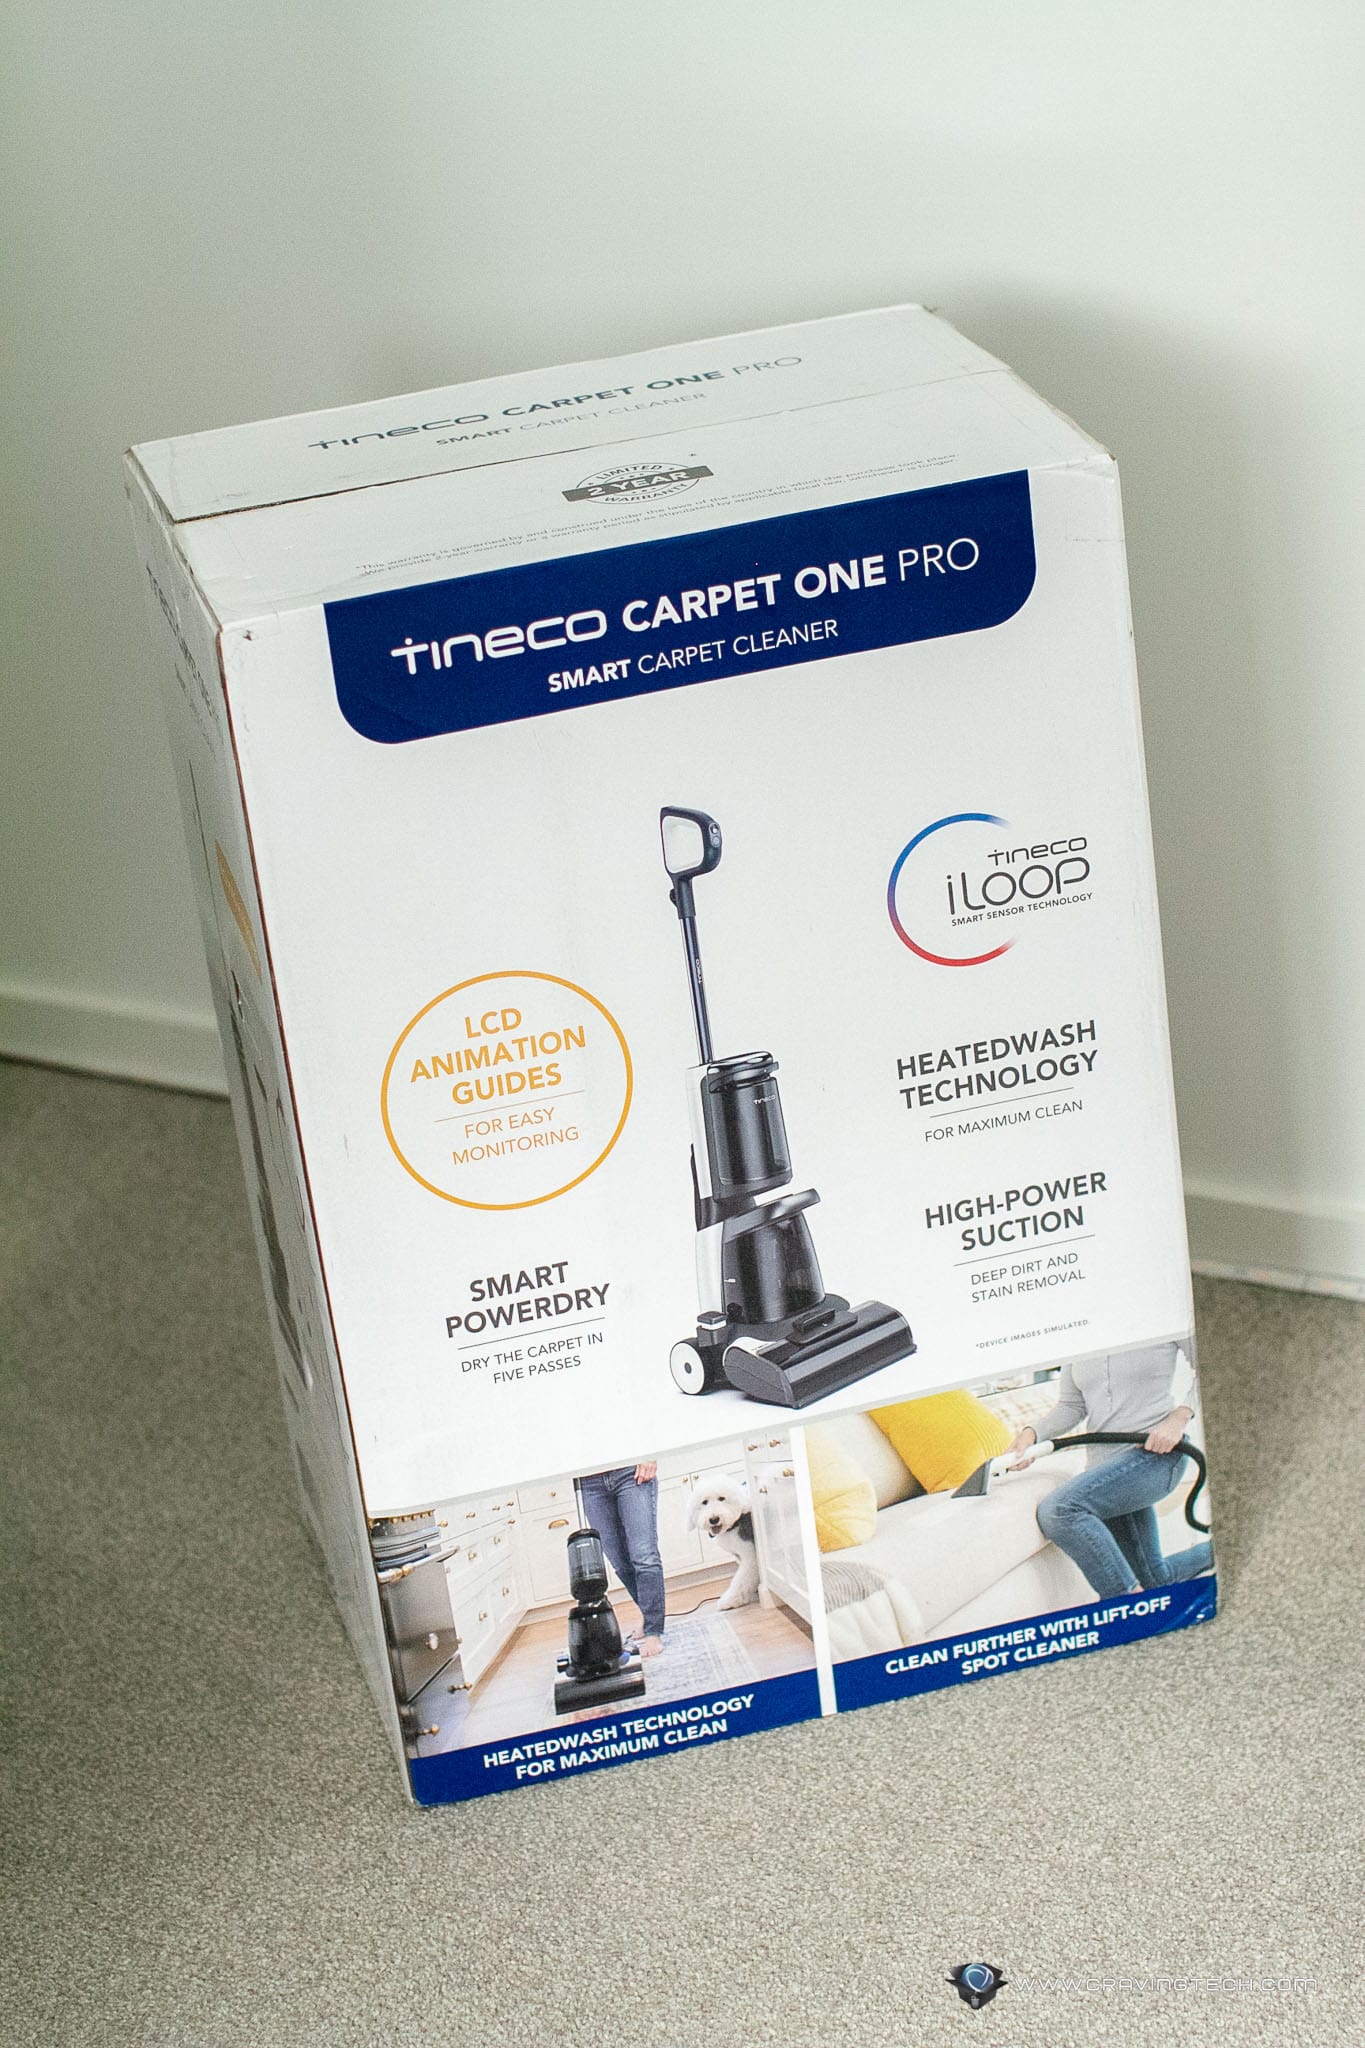 Tineco CARPET ONE PRO Shampooer Review - Clean and freshen your